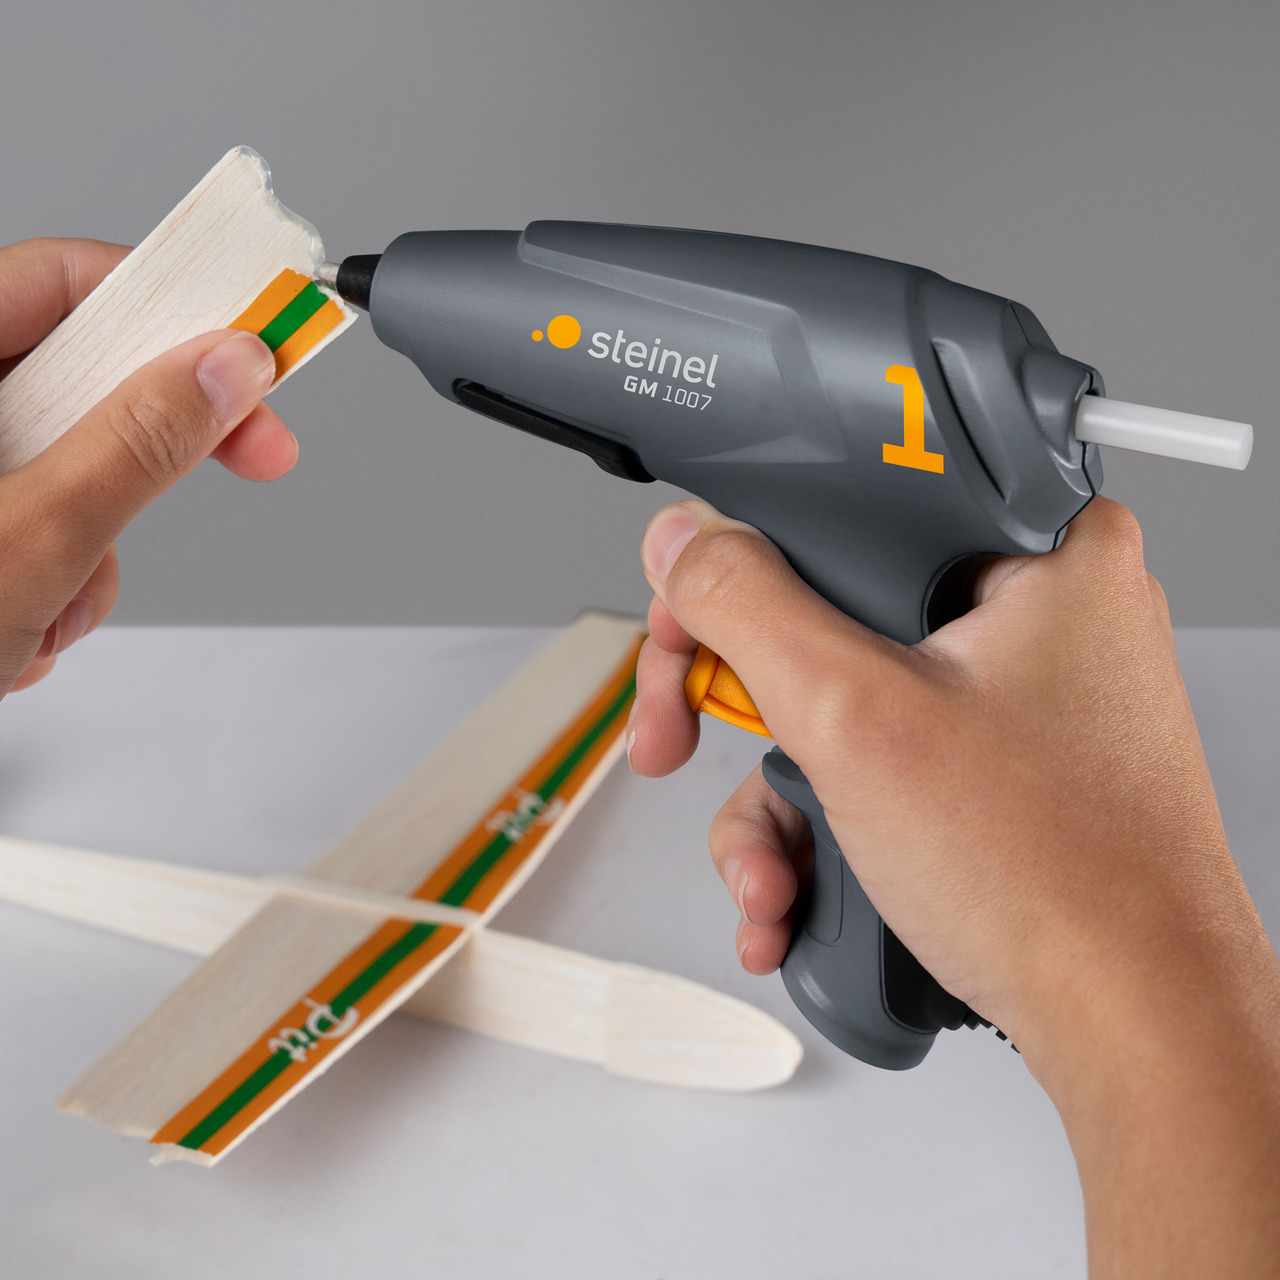 Buy Steinel Mobileglue 1007-S A Cordless hot melt glue stick incl. charger,  incl. charging cable, incl. battery level indic